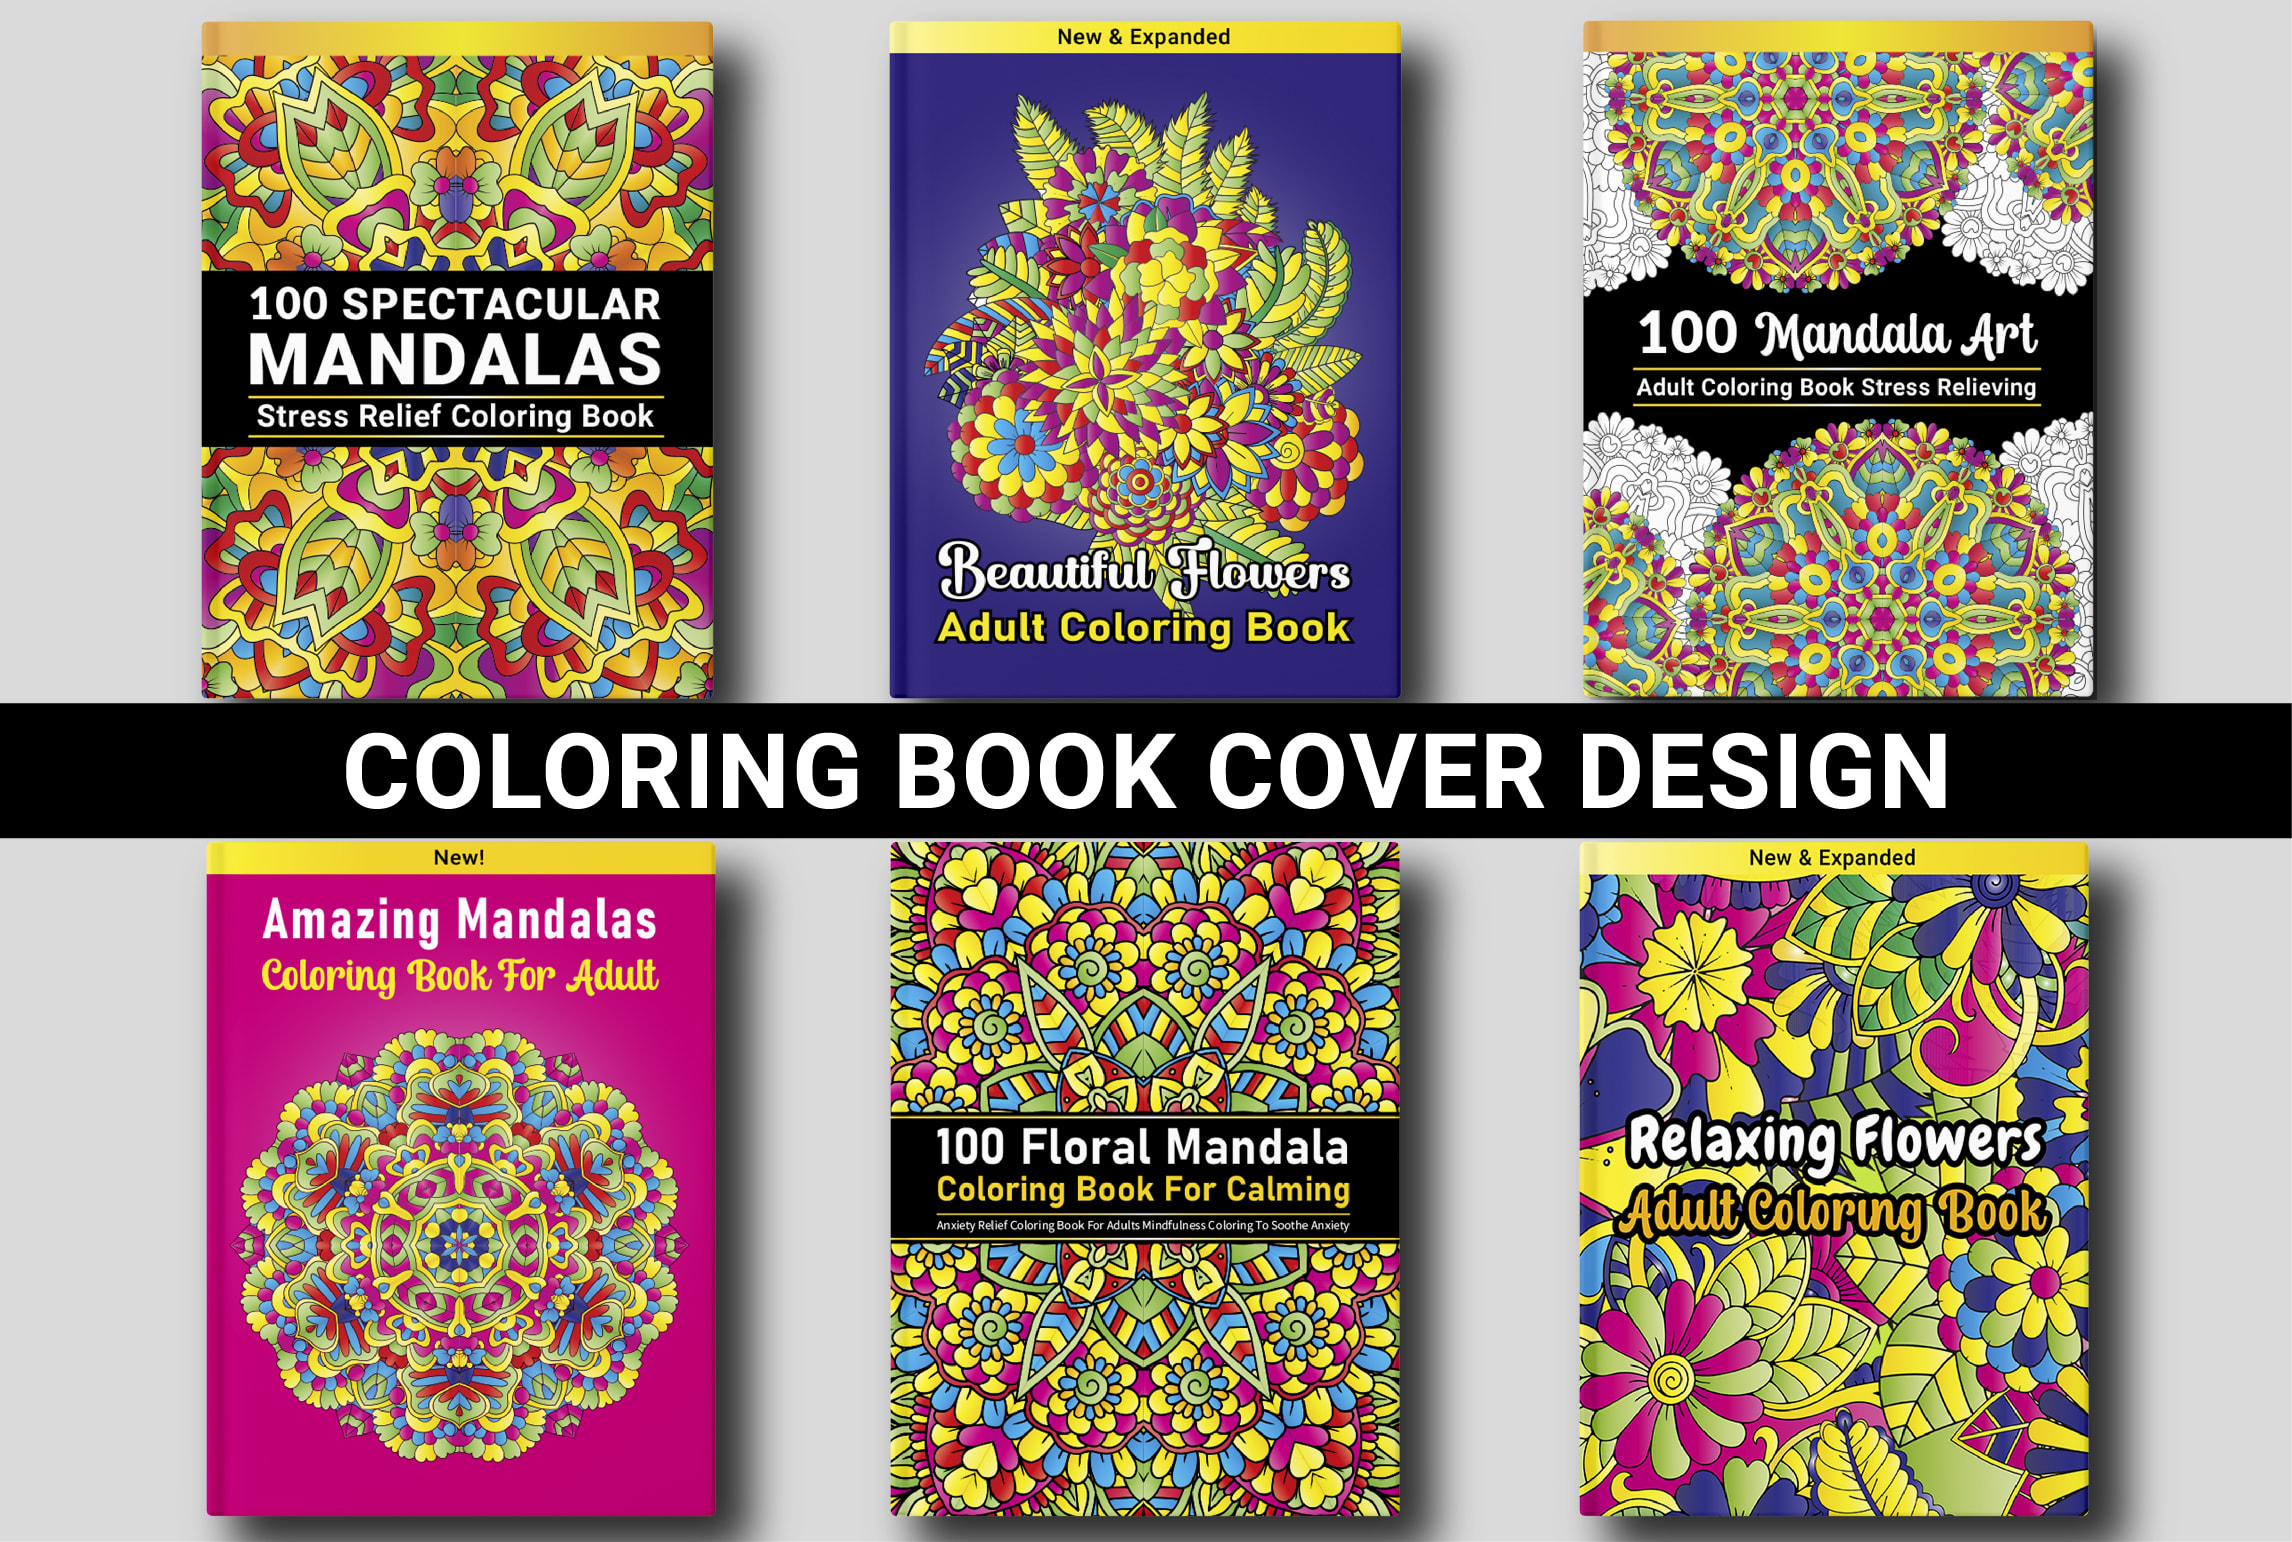 Mindful Patterns Coloring Book for Adults: An Adult Coloring Book with Easy  and Relieving Mindful Patterns Coloring Pages Prints for Stress Relief 